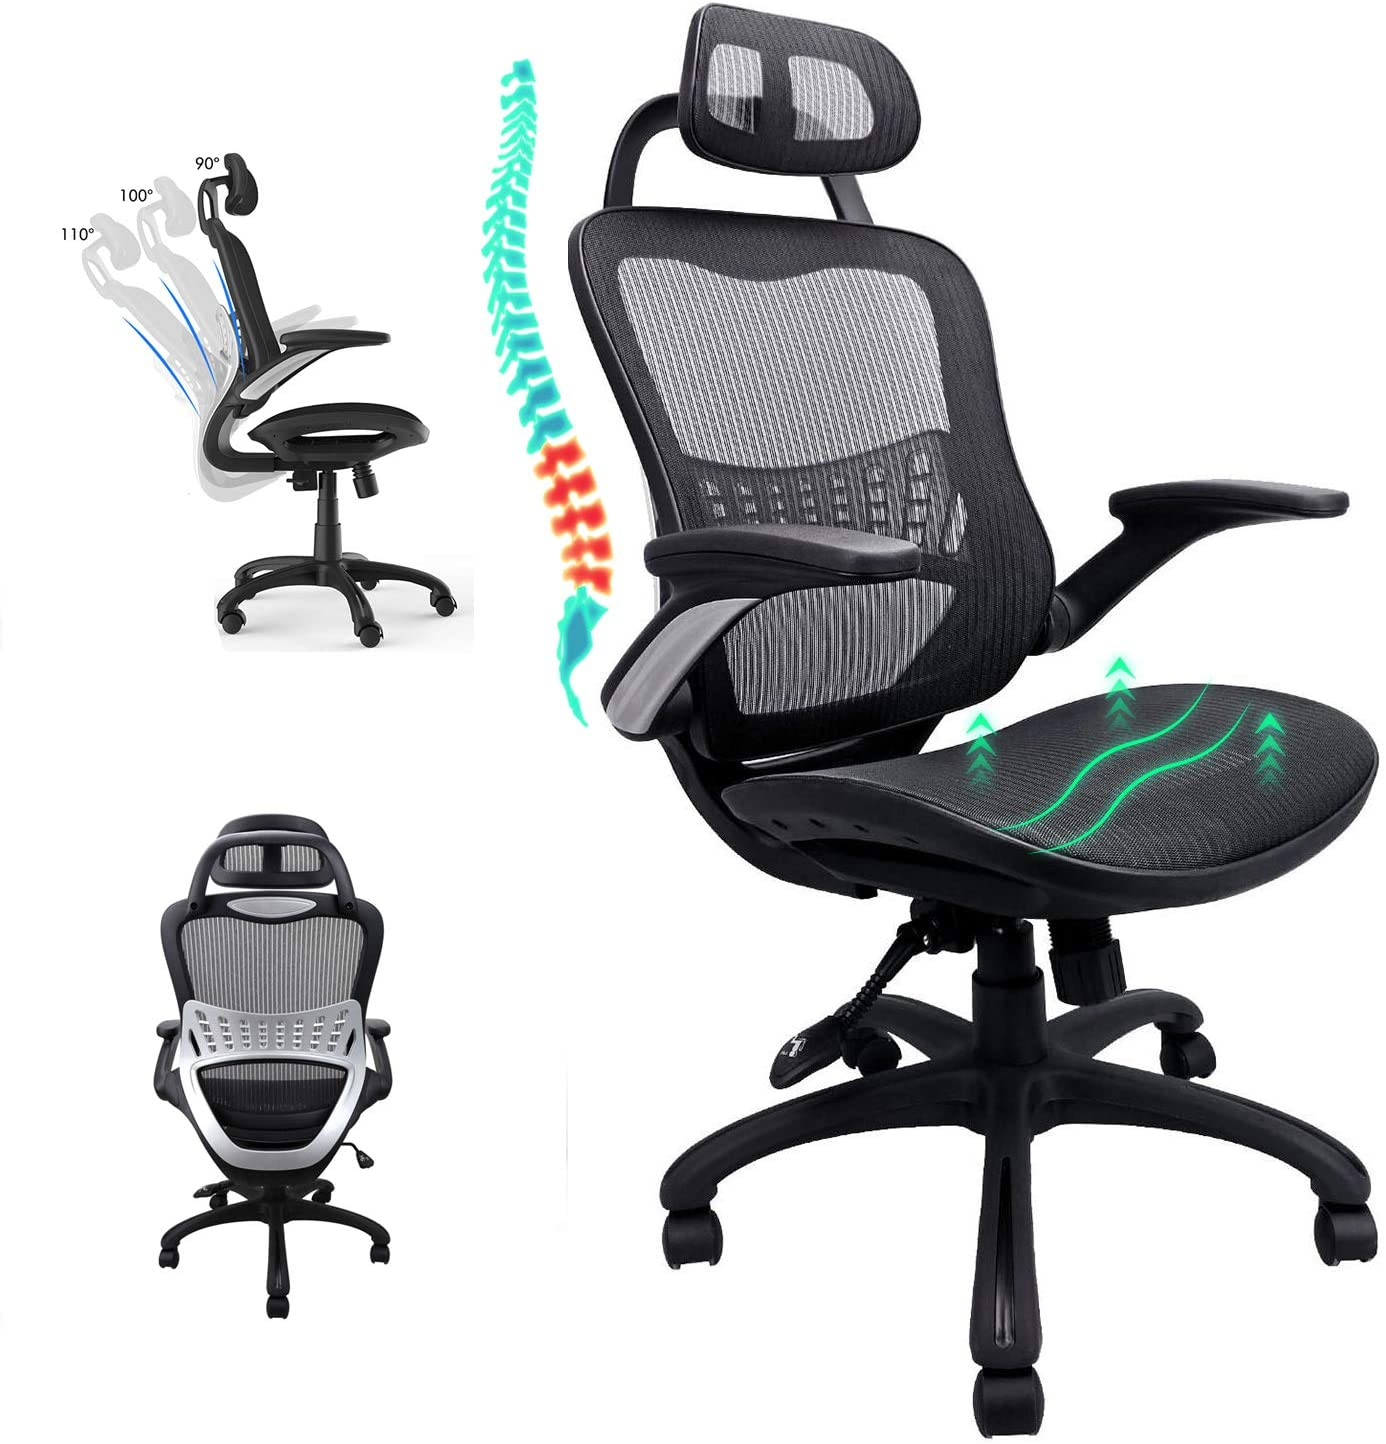 regular office chair, office chair vs gaming